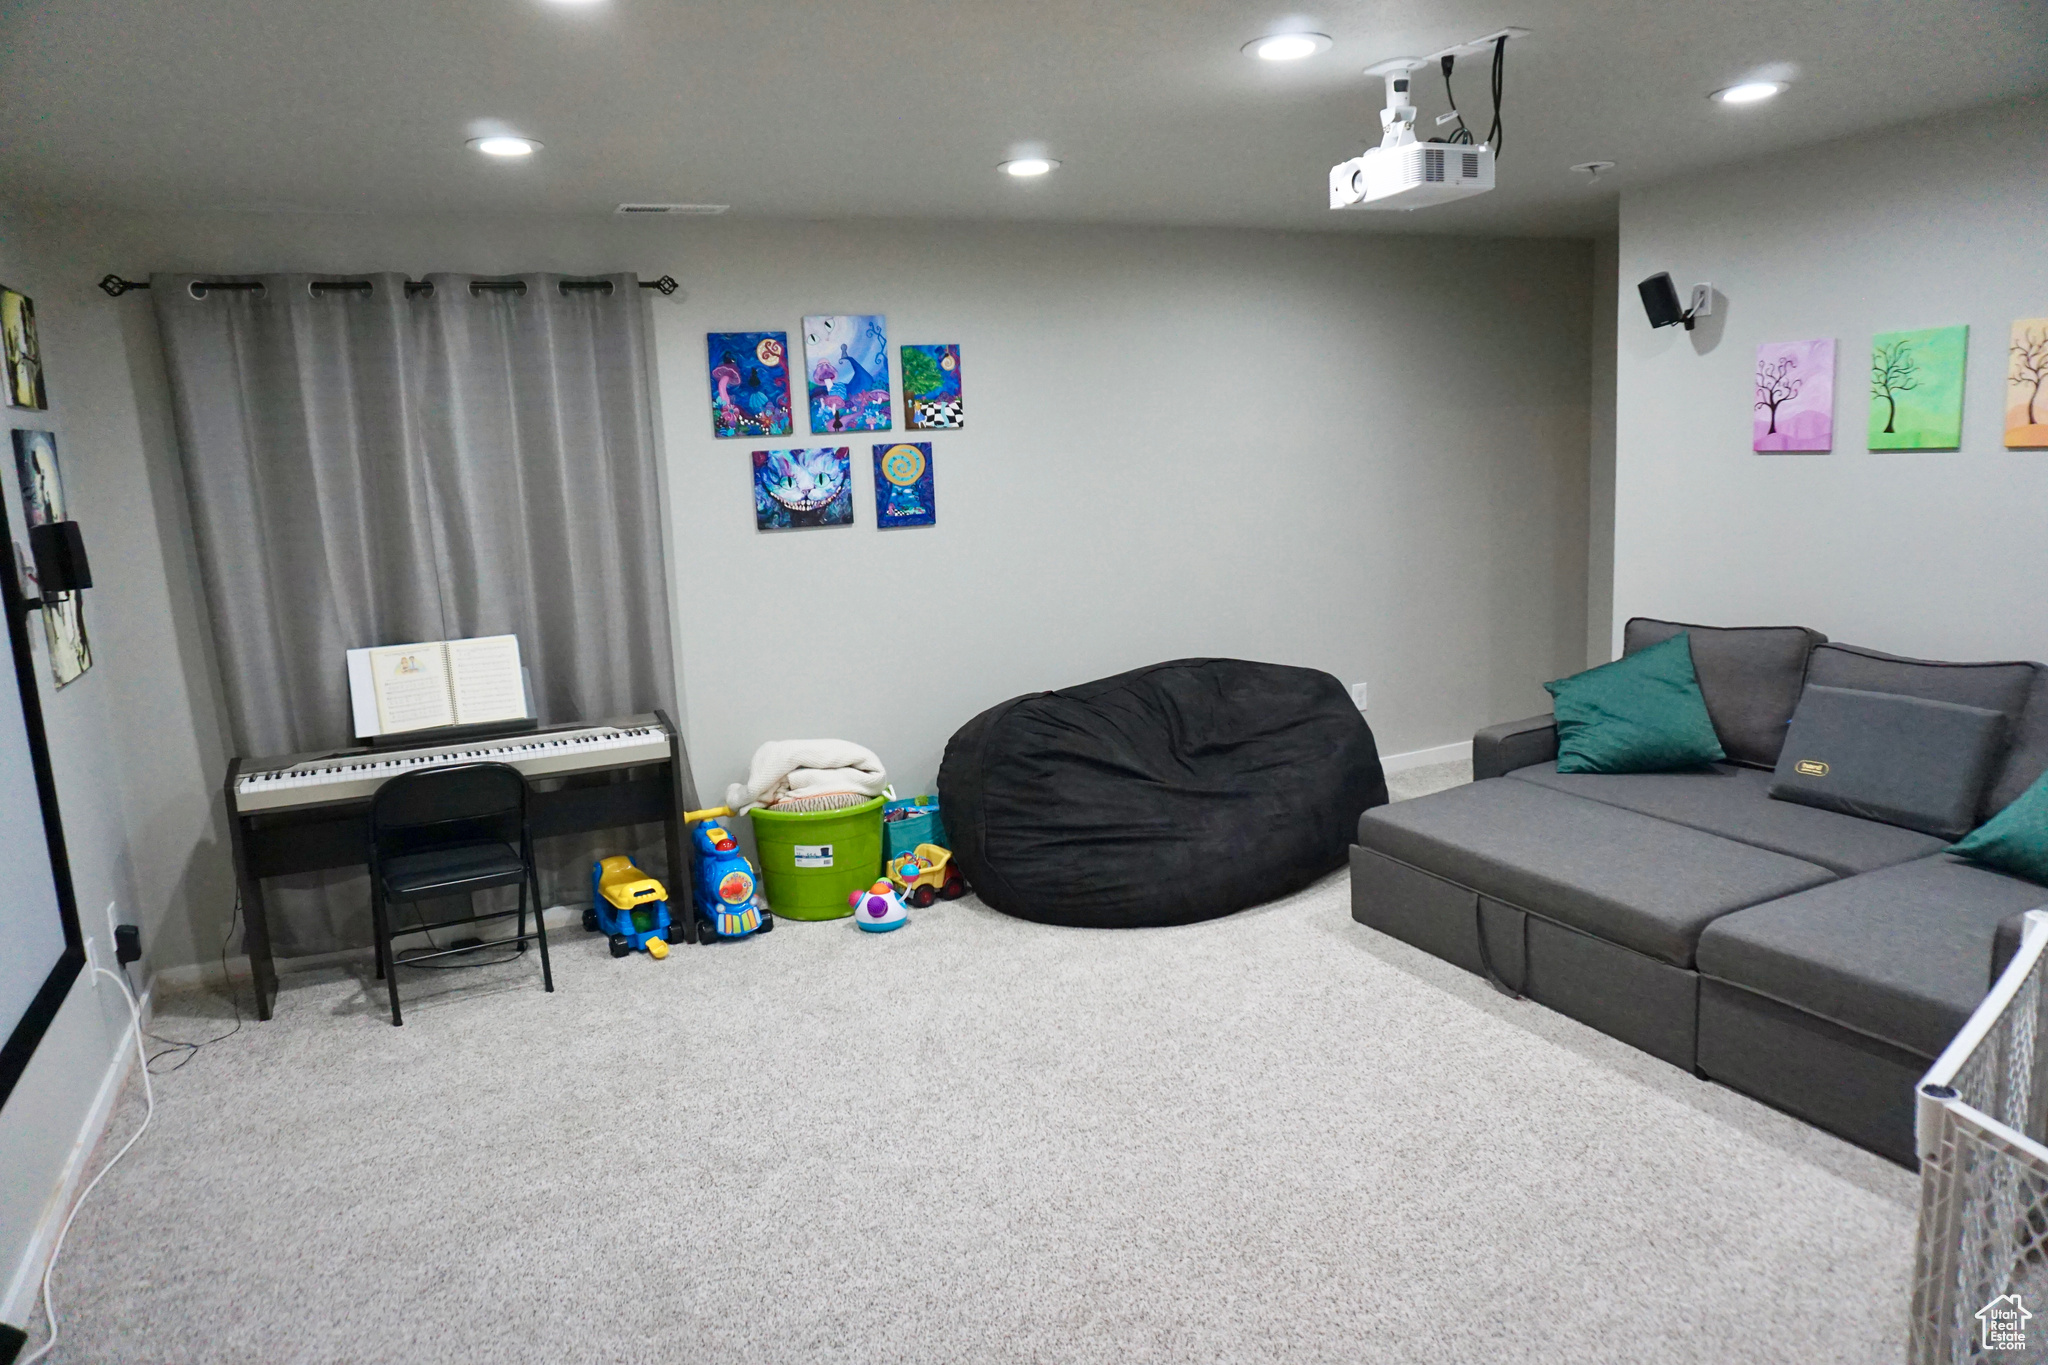 Carpeted basement that can be used as bedroom, living area, or media room